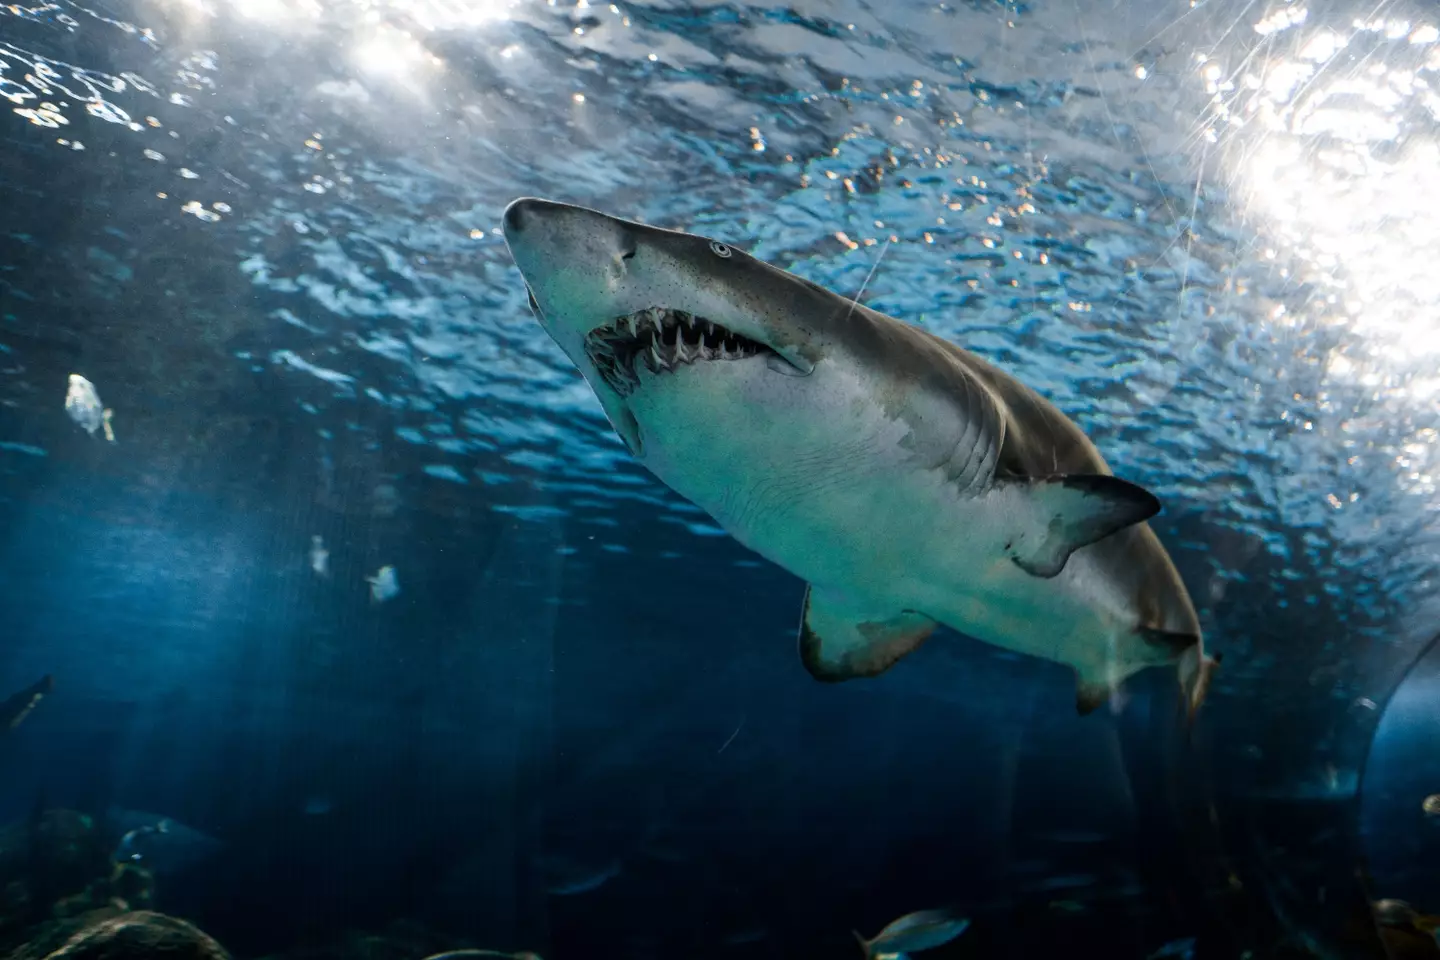 Great white sharks have been at the receiving end of some negative headlines recently.